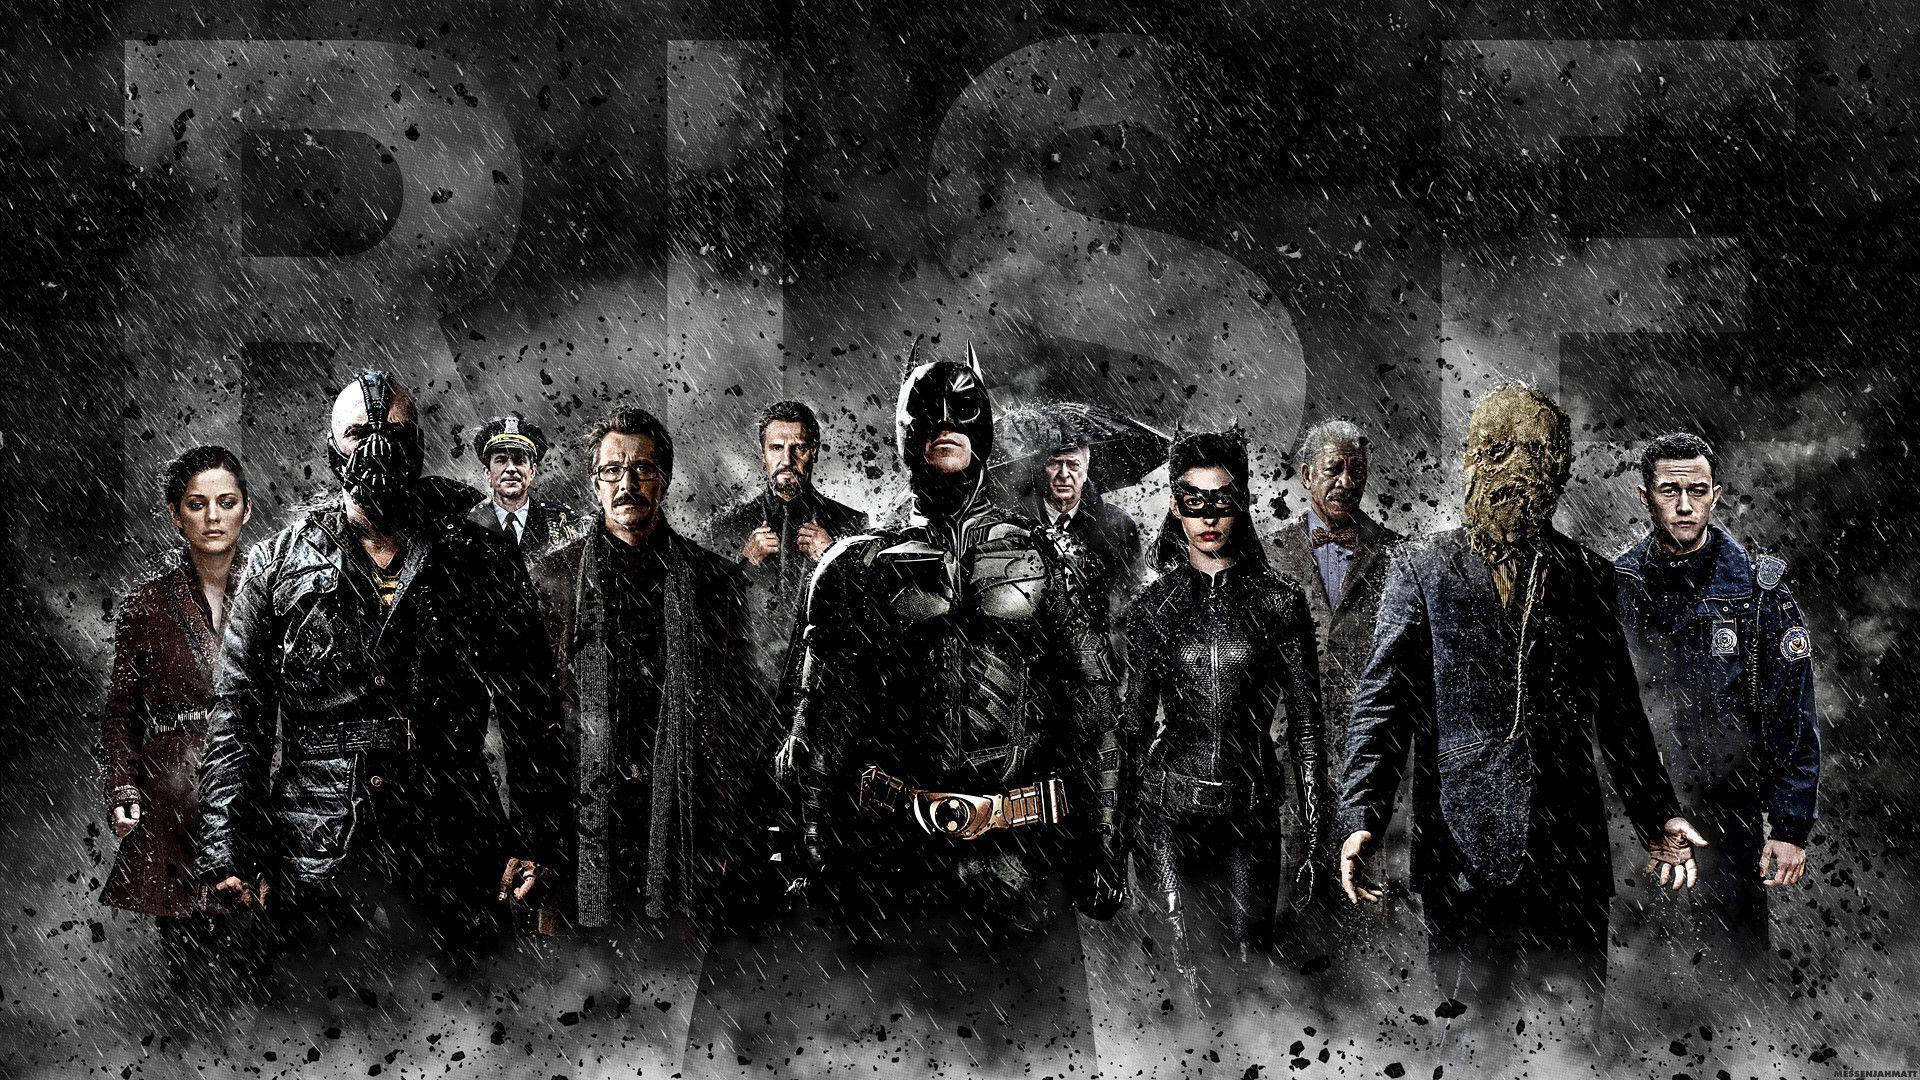 An Iconic Cast: The Dark Knight Trilogy Background